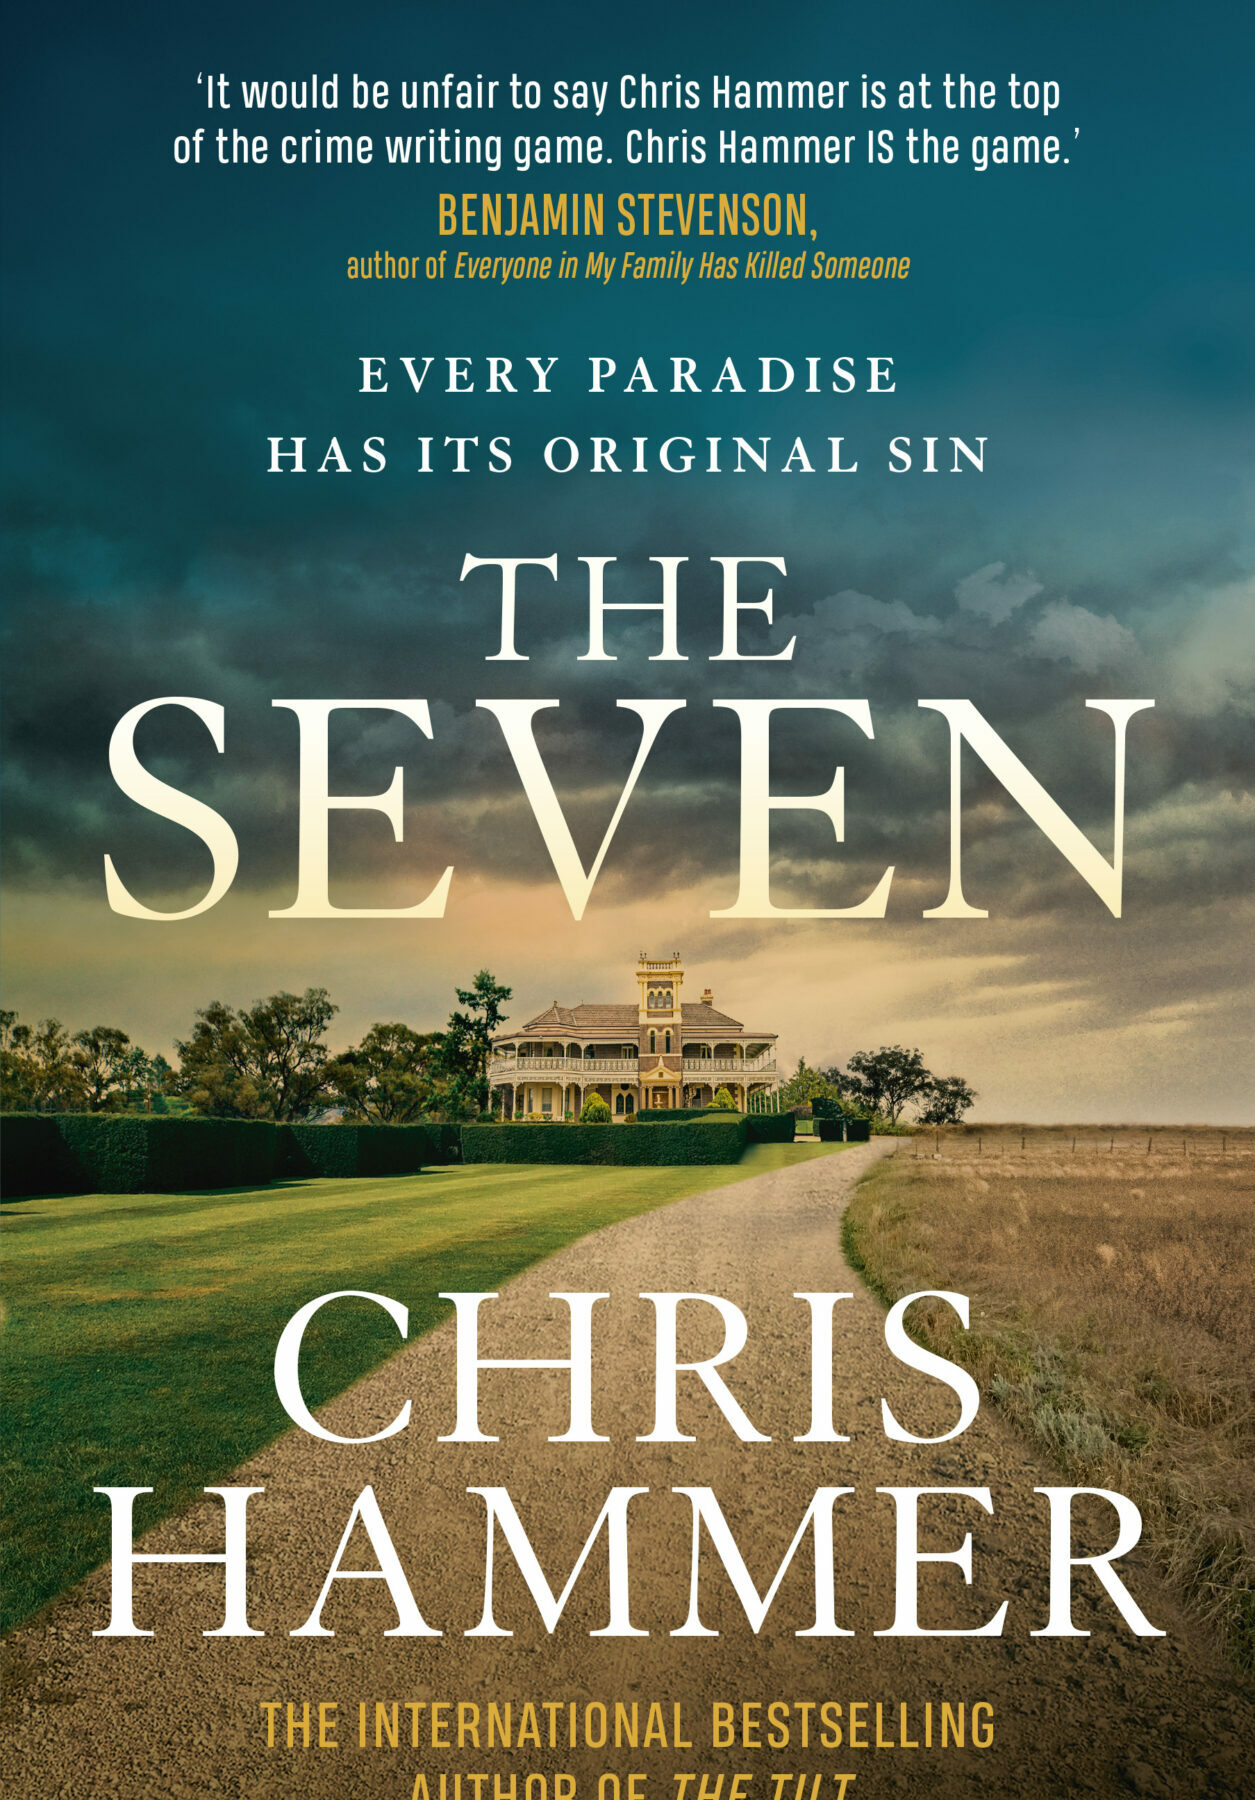 A book cover with a photograph of clouds above a house and green country estate. The title and author are in large white letters over the top